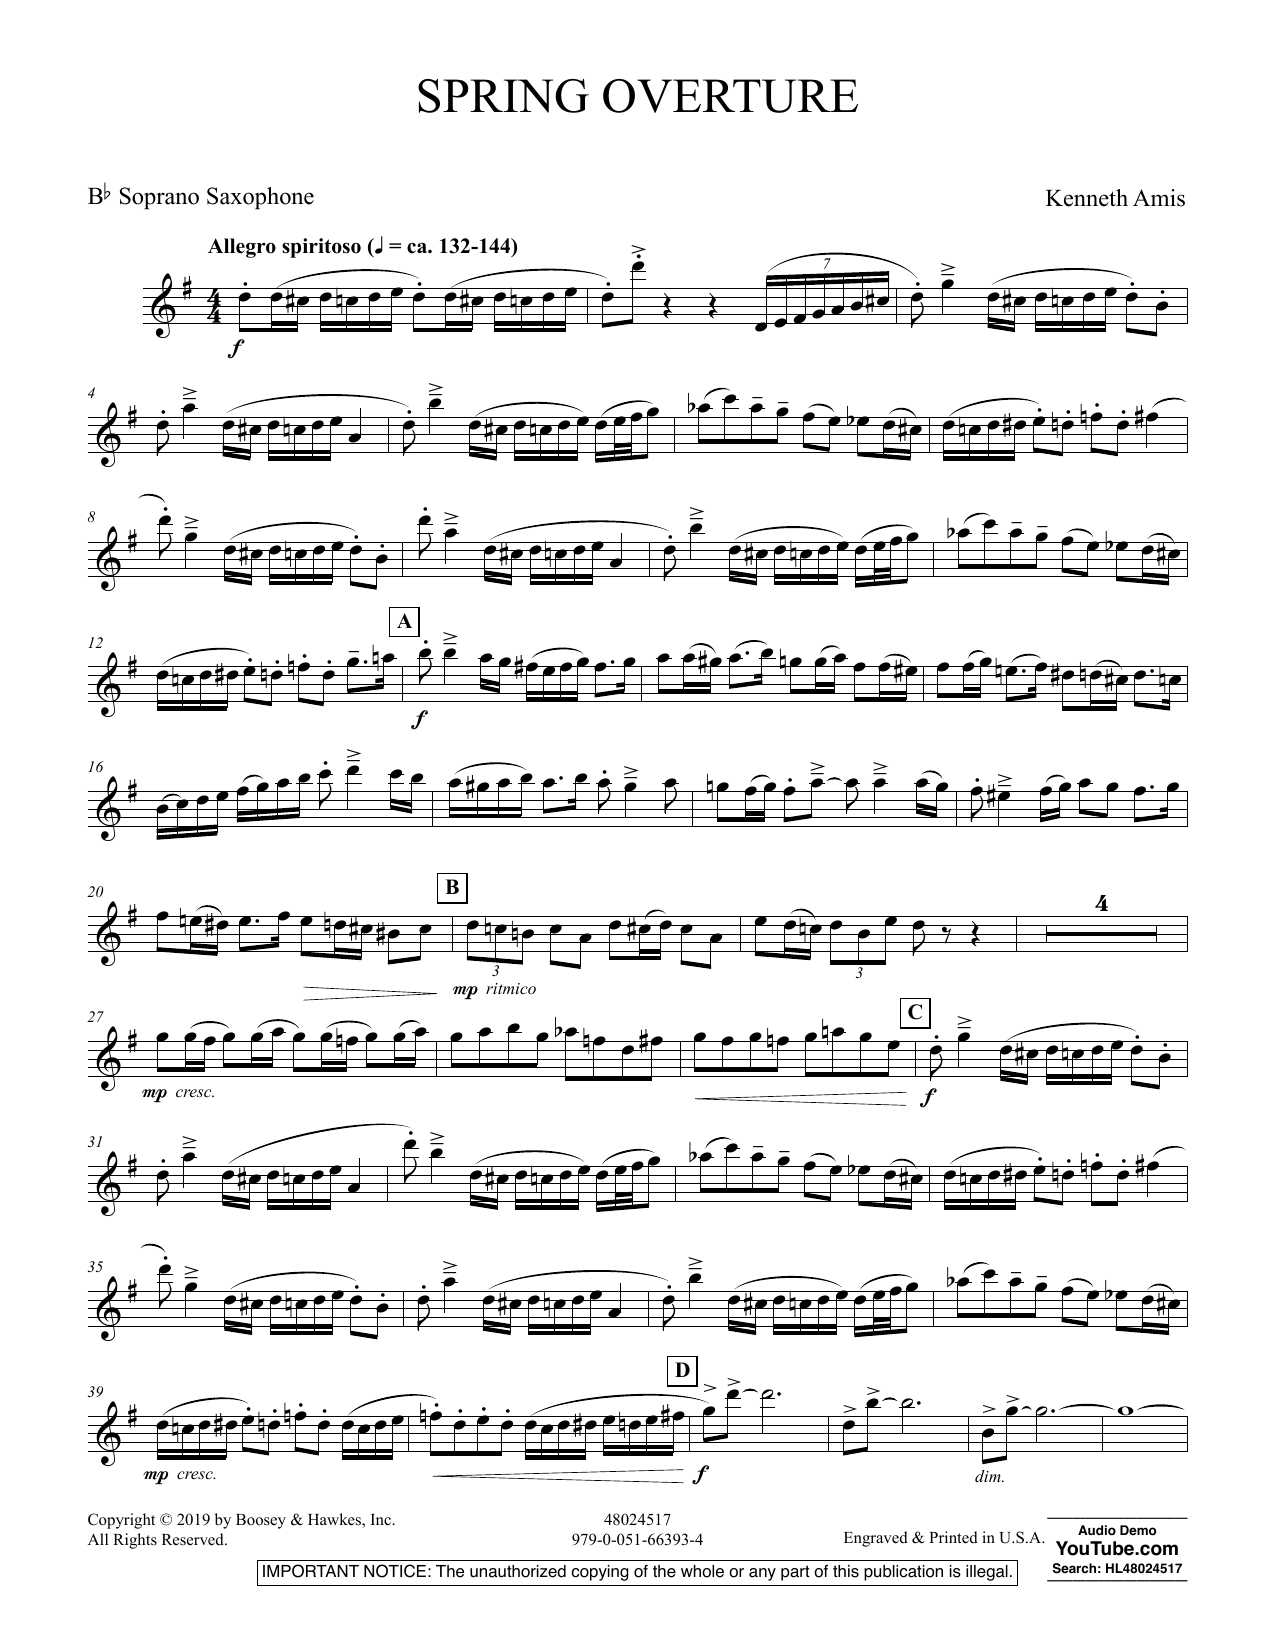 Kenneth Amis Spring Overture - Bb Soprano Saxophone sheet music preview music notes and score for Concert Band including 4 page(s)